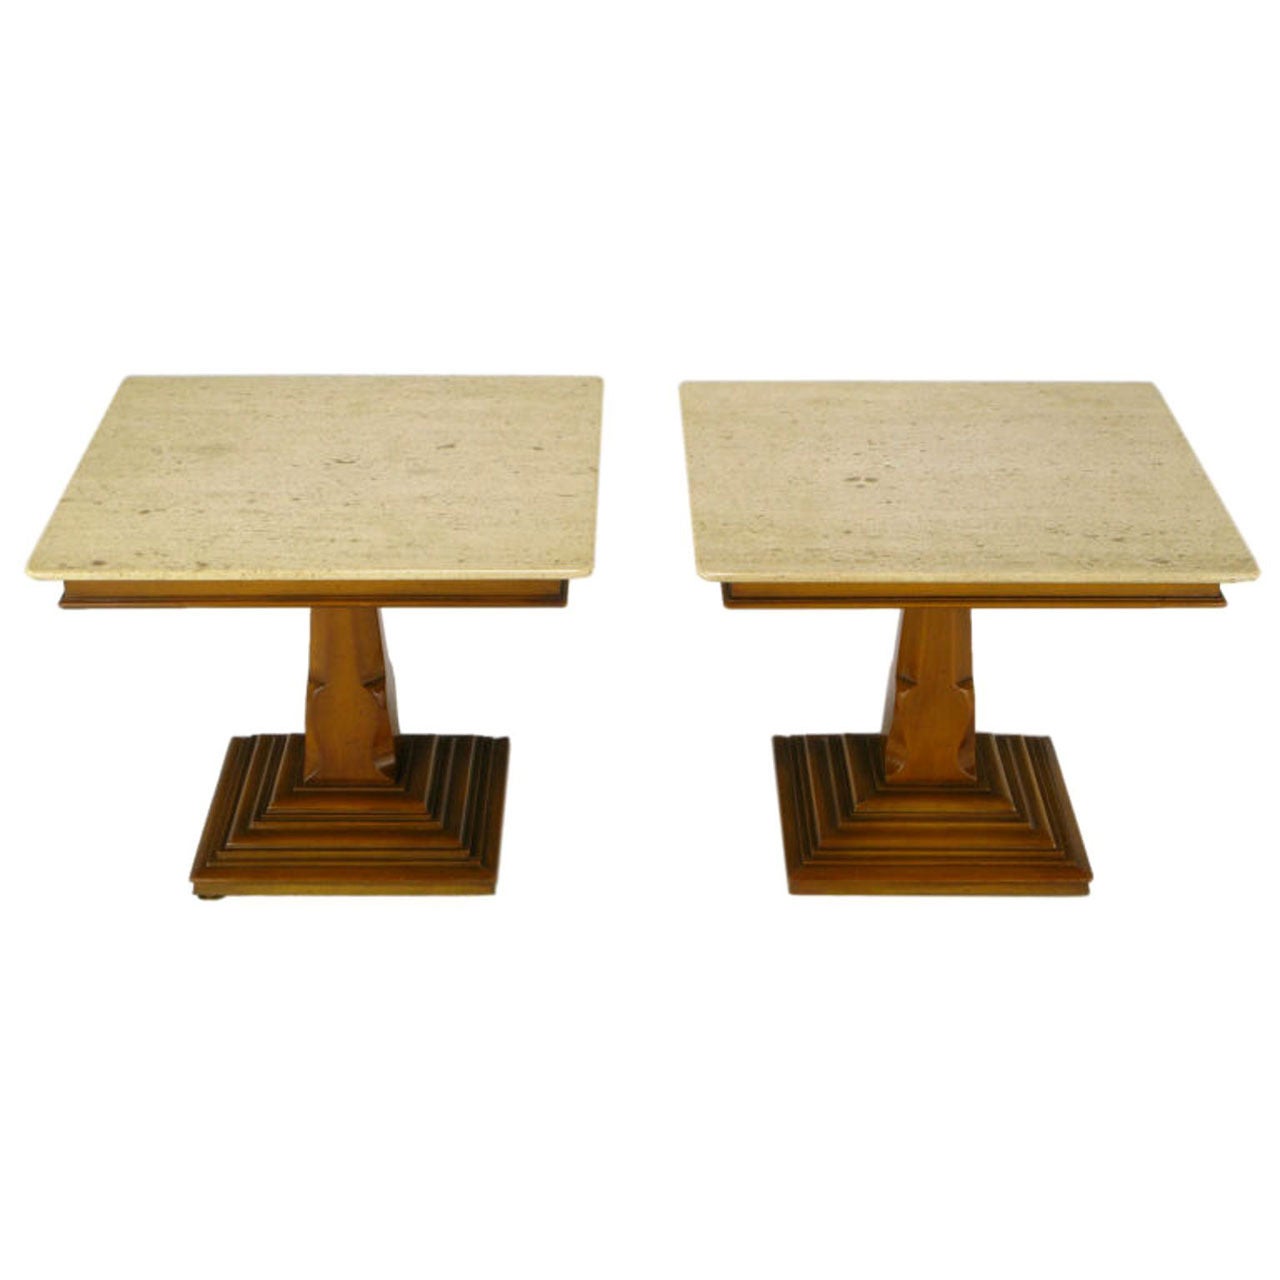 Pair of Spanish Revival Maple and Portuguese Travertine Side Tables